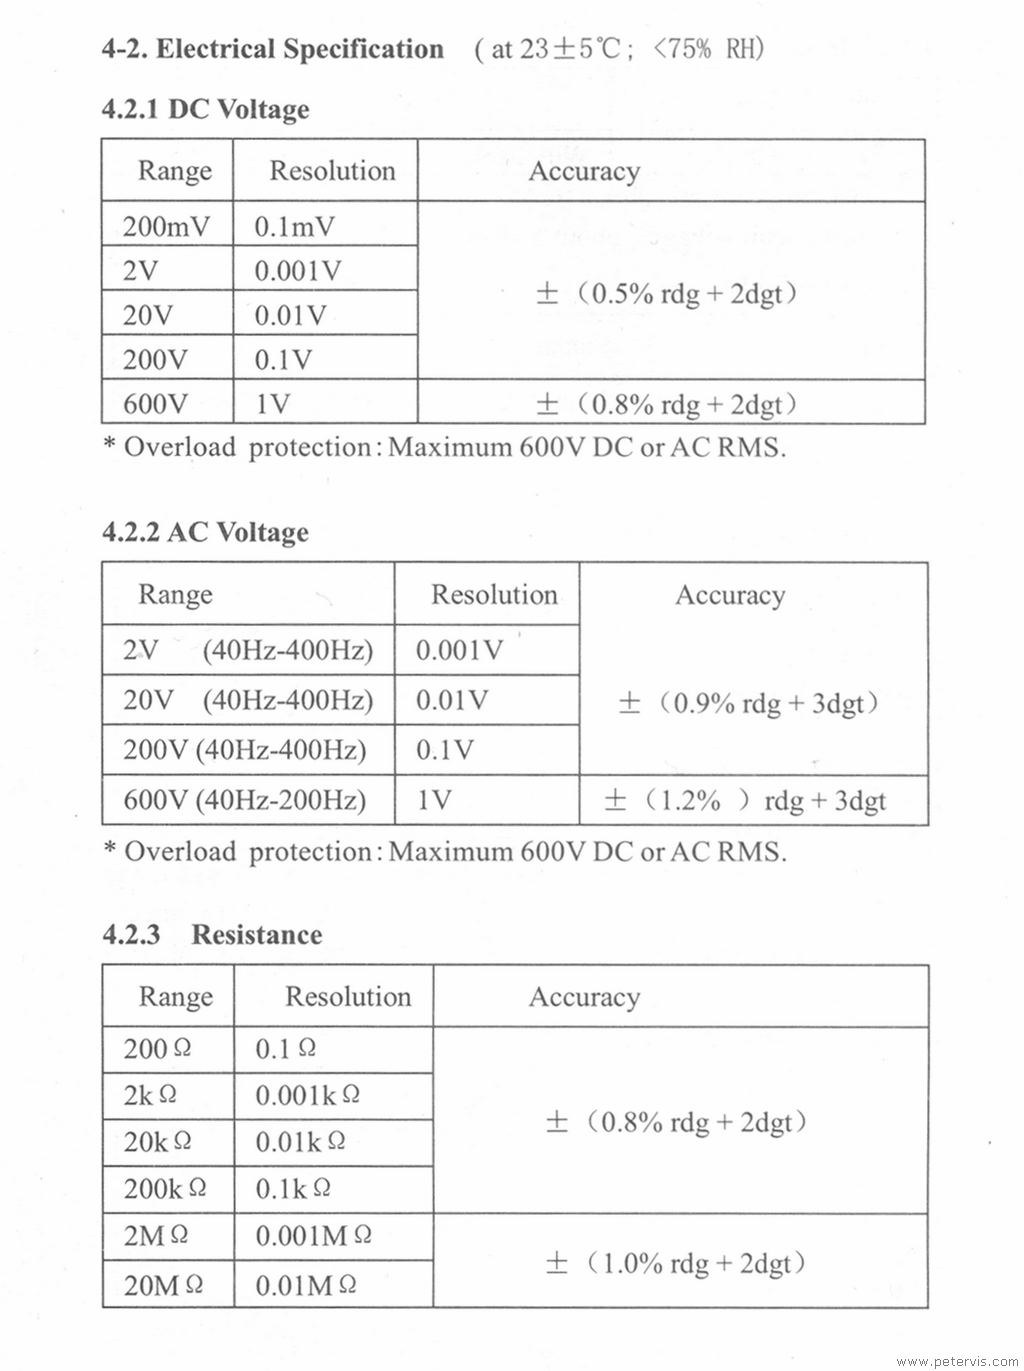 Voltage and Resistance Accuracy